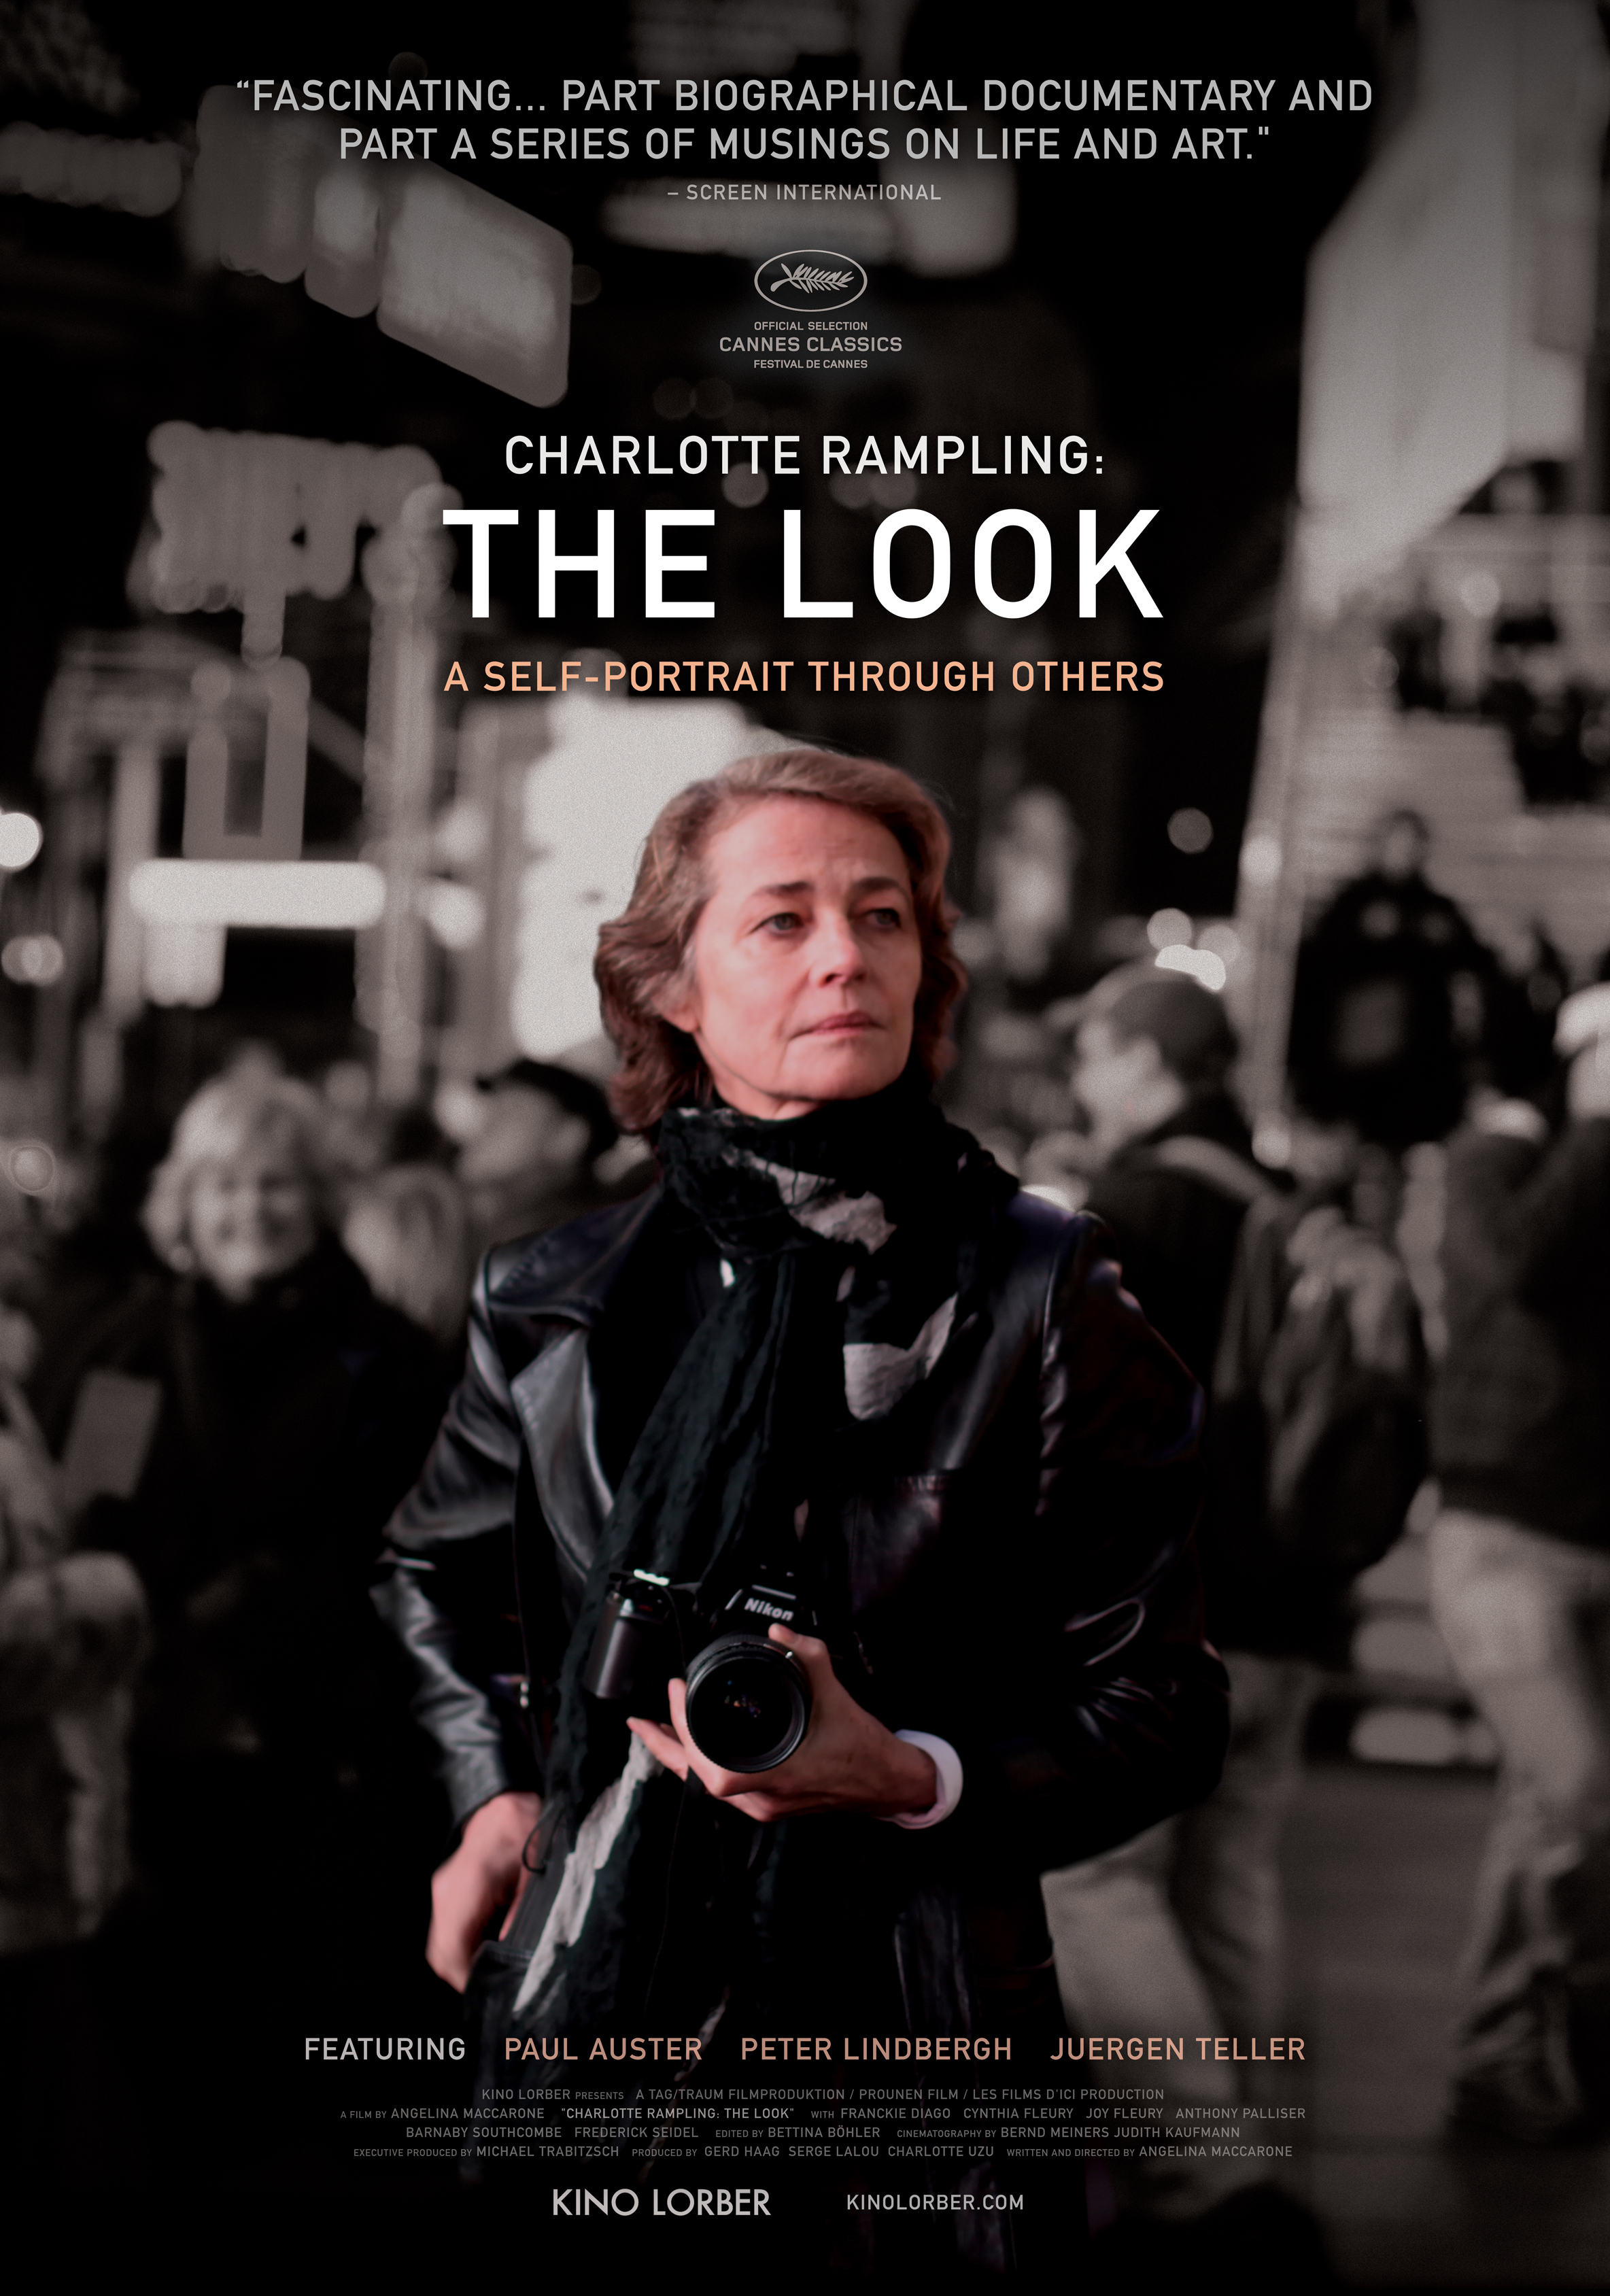  Film Poster from "The Look" 